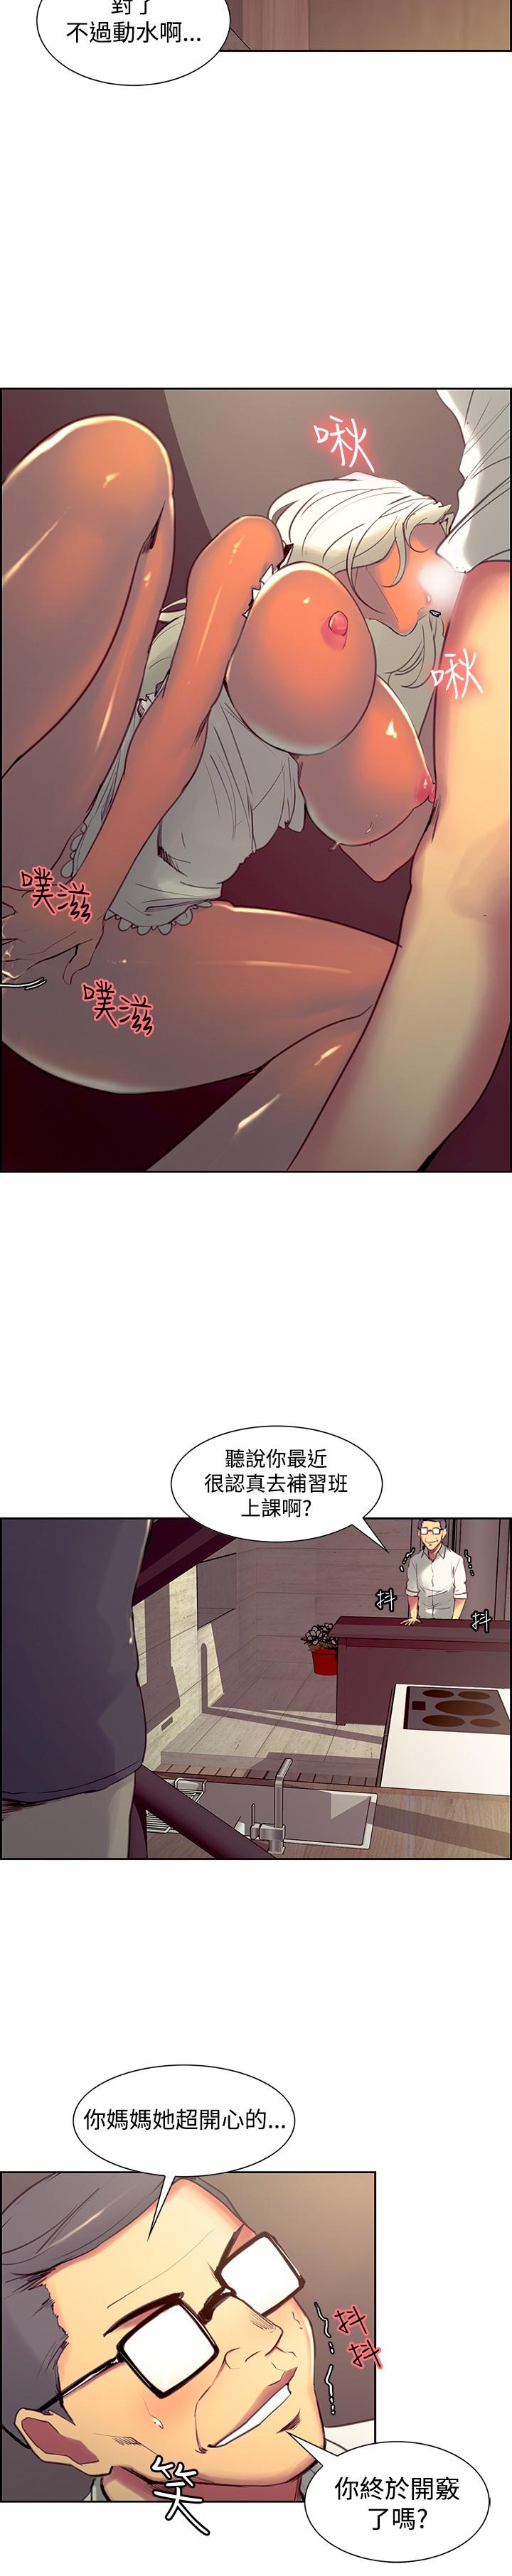 [Serious] Domesticate the Housekeeper 调教家政妇 Ch.29~44END [Chinese]中文 63